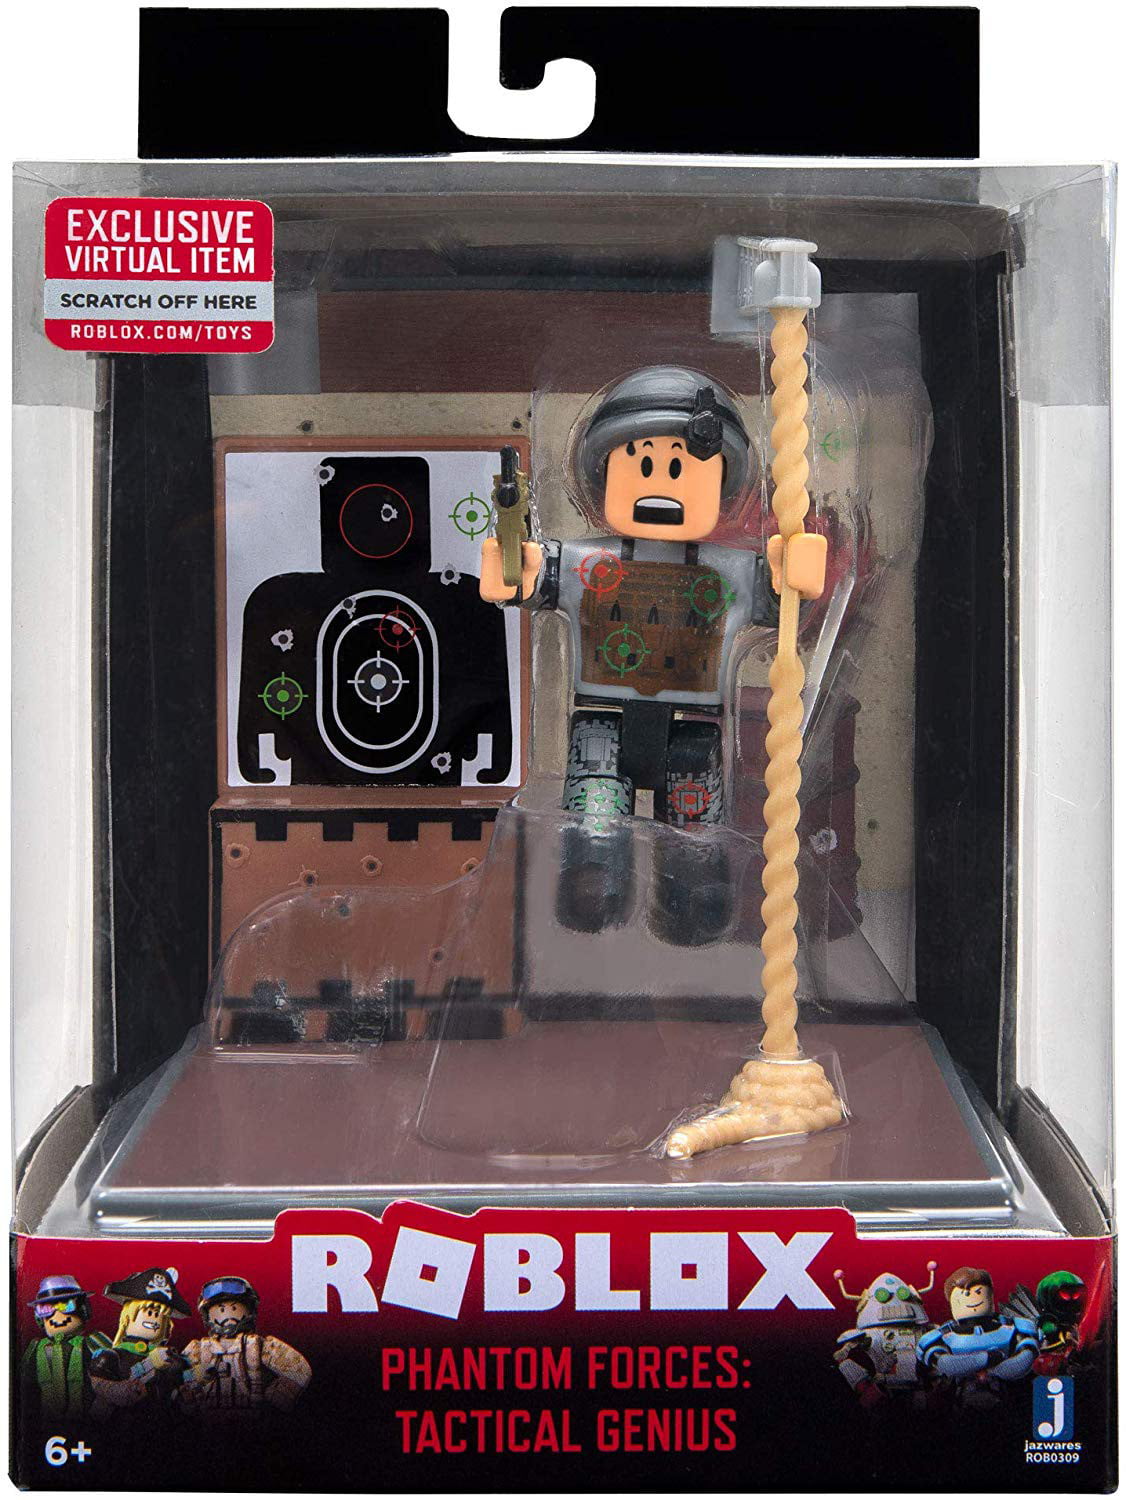 Roblox Phantom Forces Game Set & Code Item, Unboxing Roblox Toys